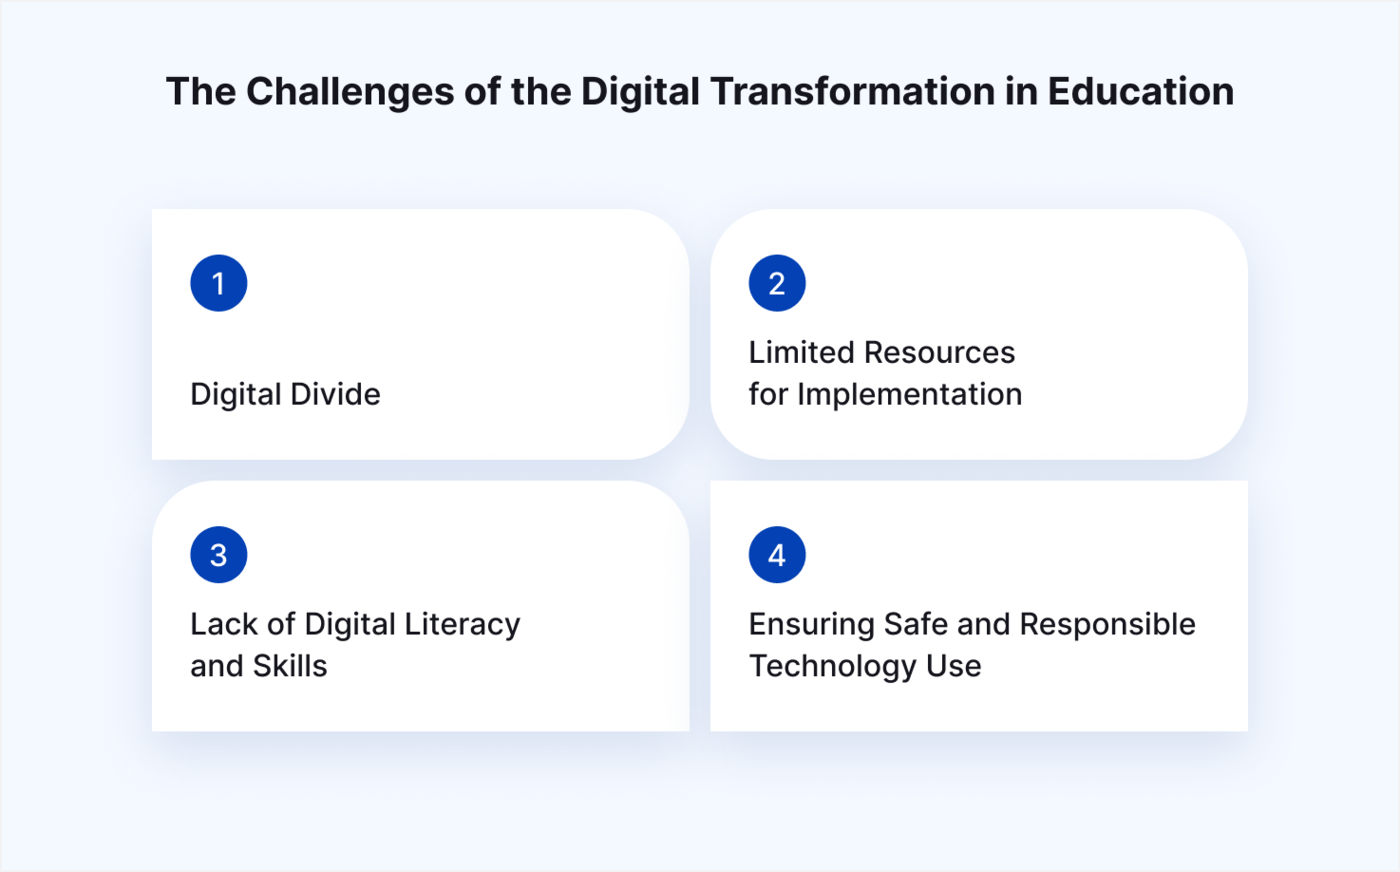 The challenges of the digital transformation in education